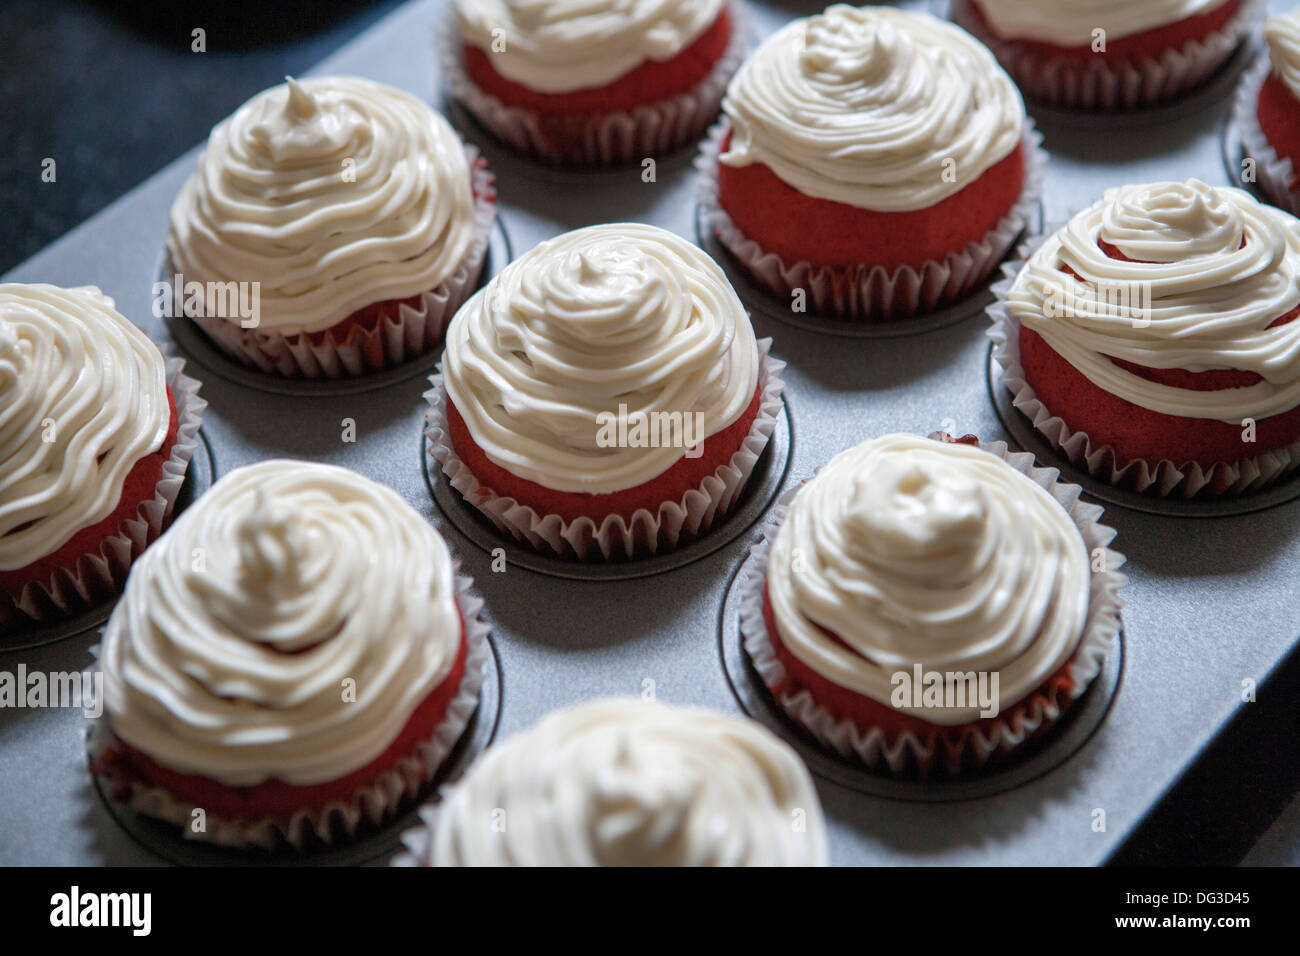 Red Velvet Cupcakes with Cream Cheese Icing, Close-Up, High Angle View Stock Photo